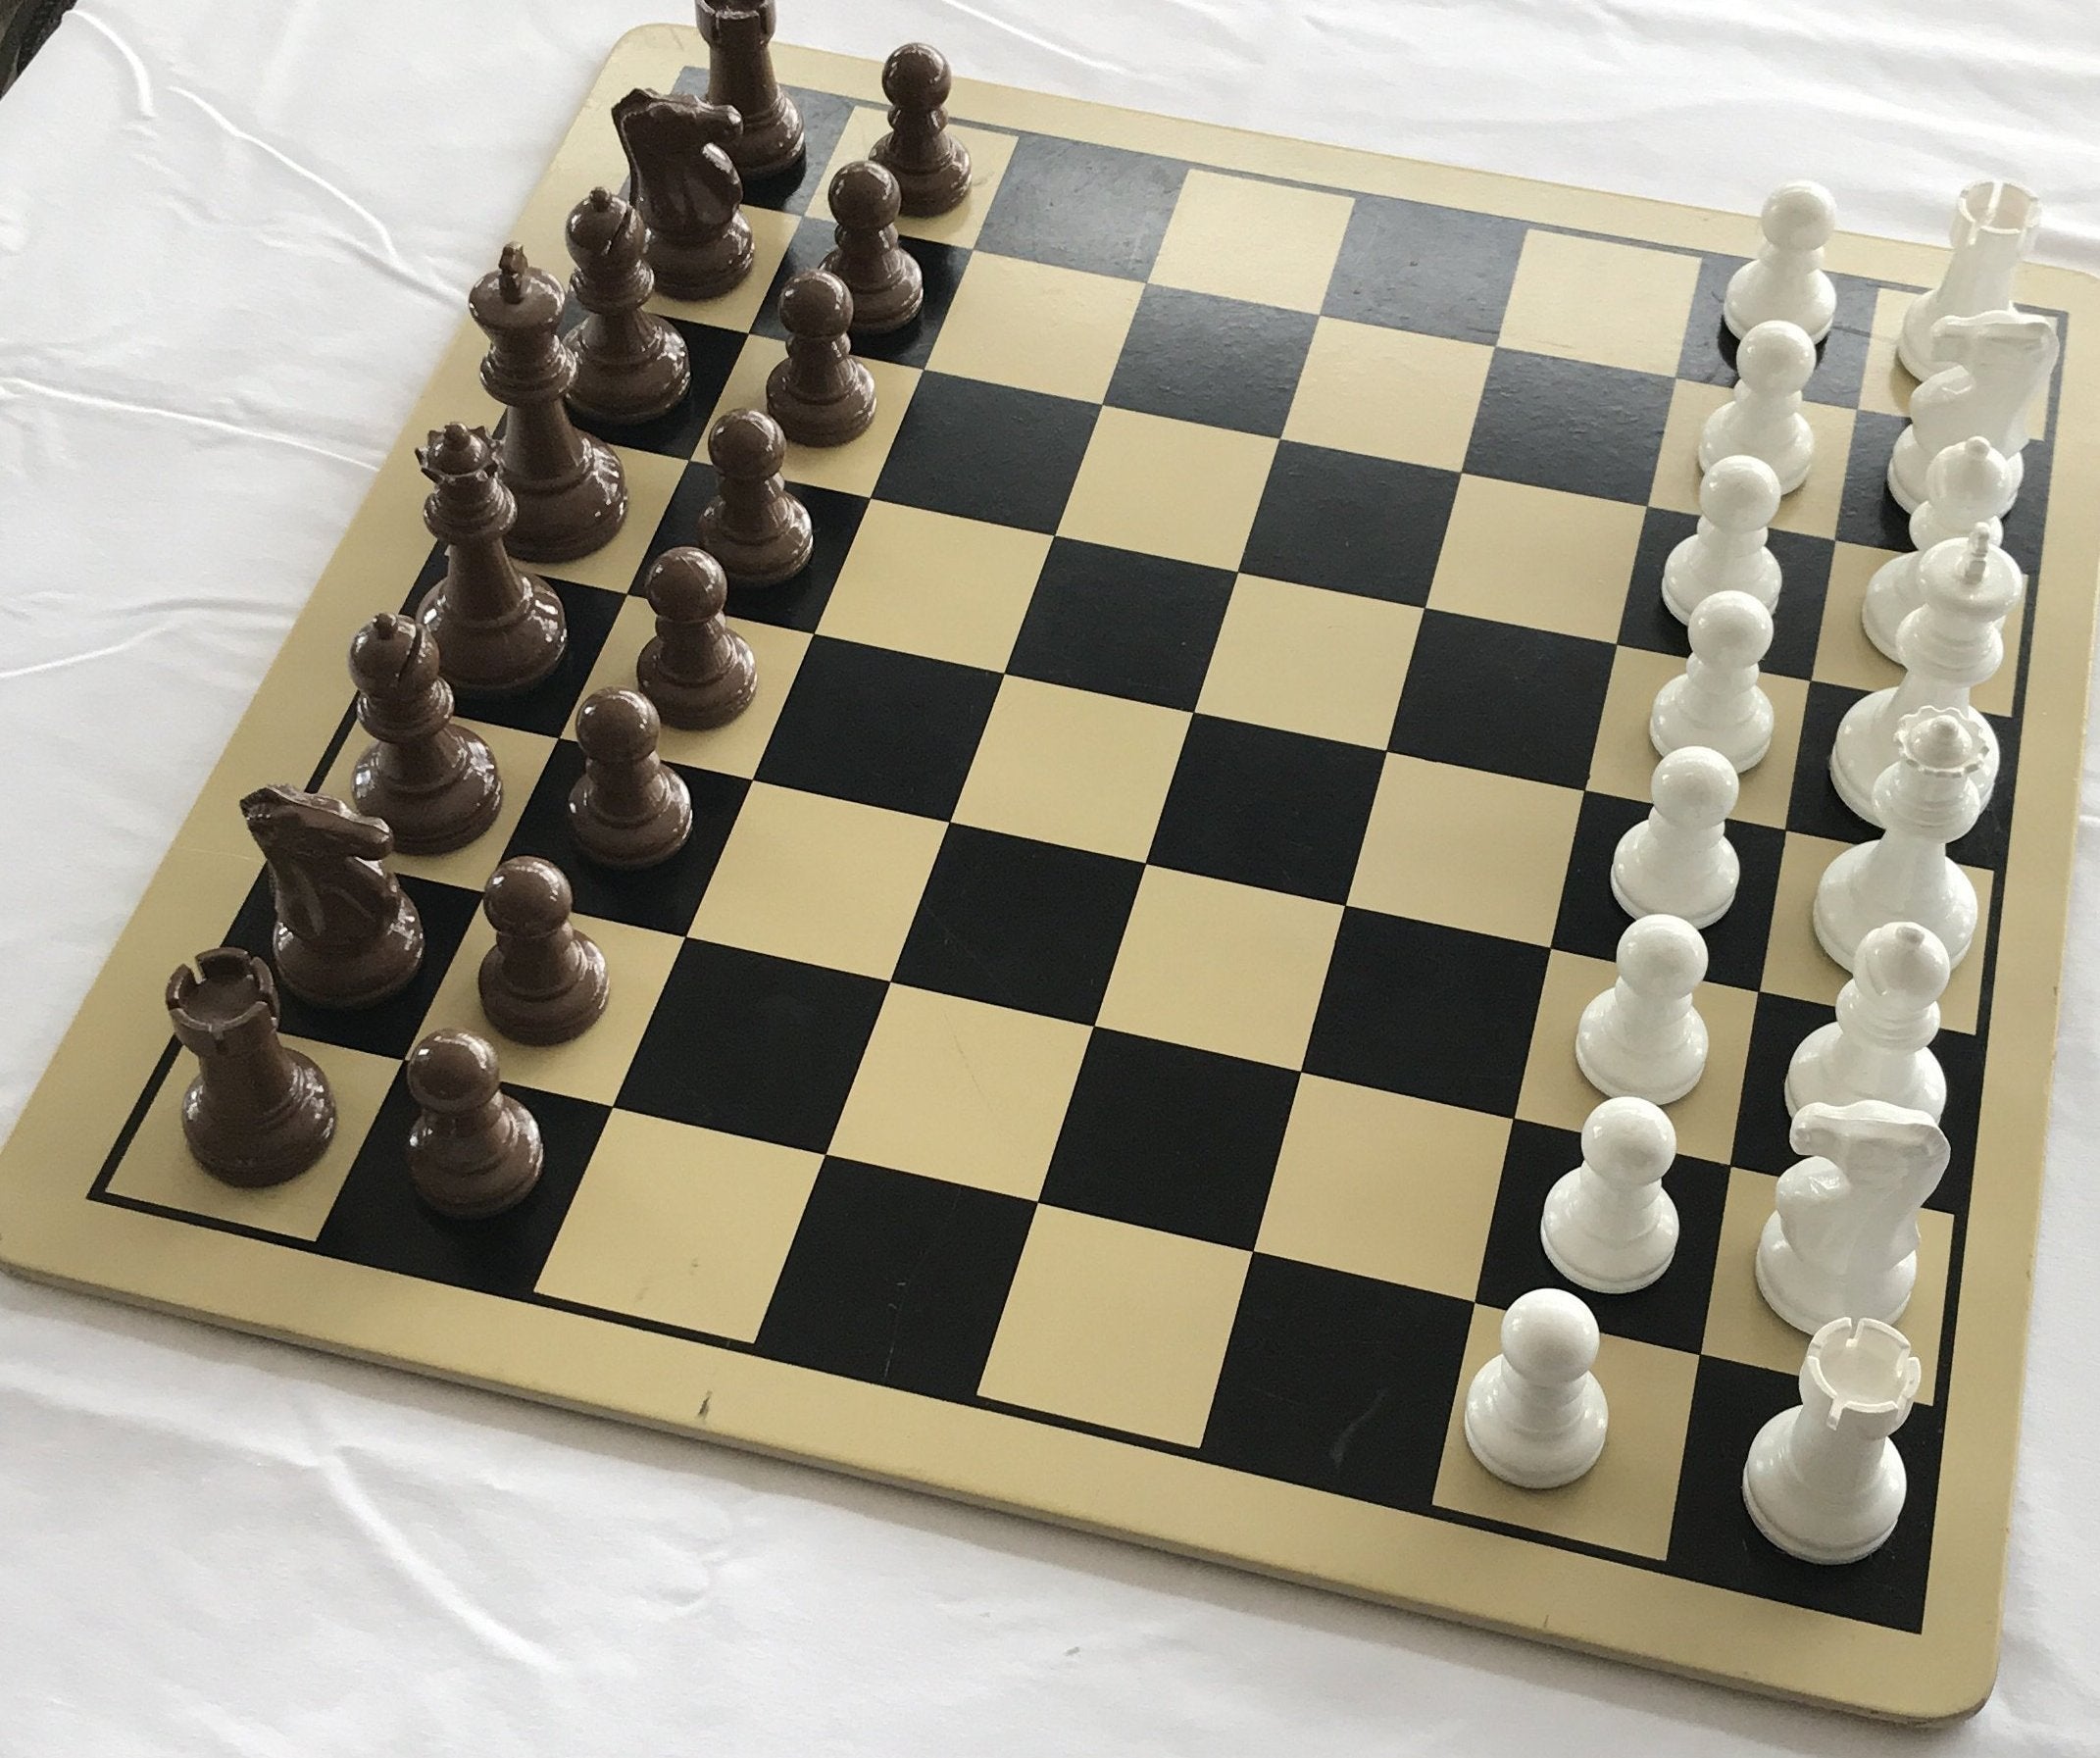 No Stress Chess White Rook Staunton Replacement Game Piece 2010